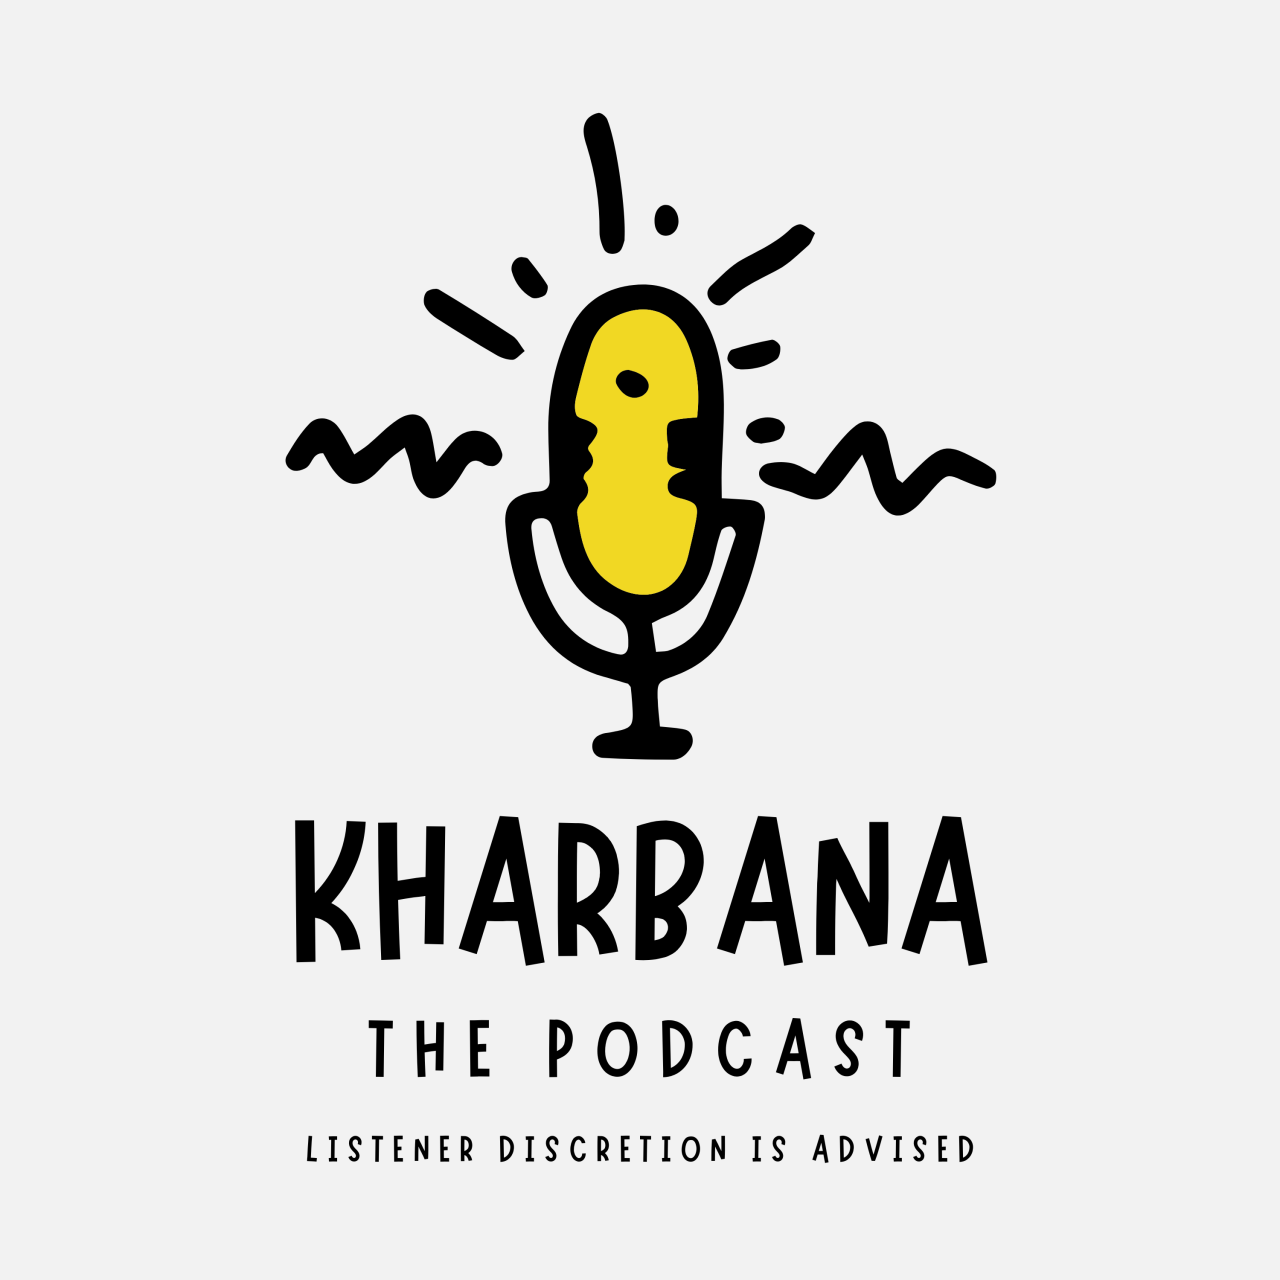 Kharbana podcast by c town chatter online magazine spotify 